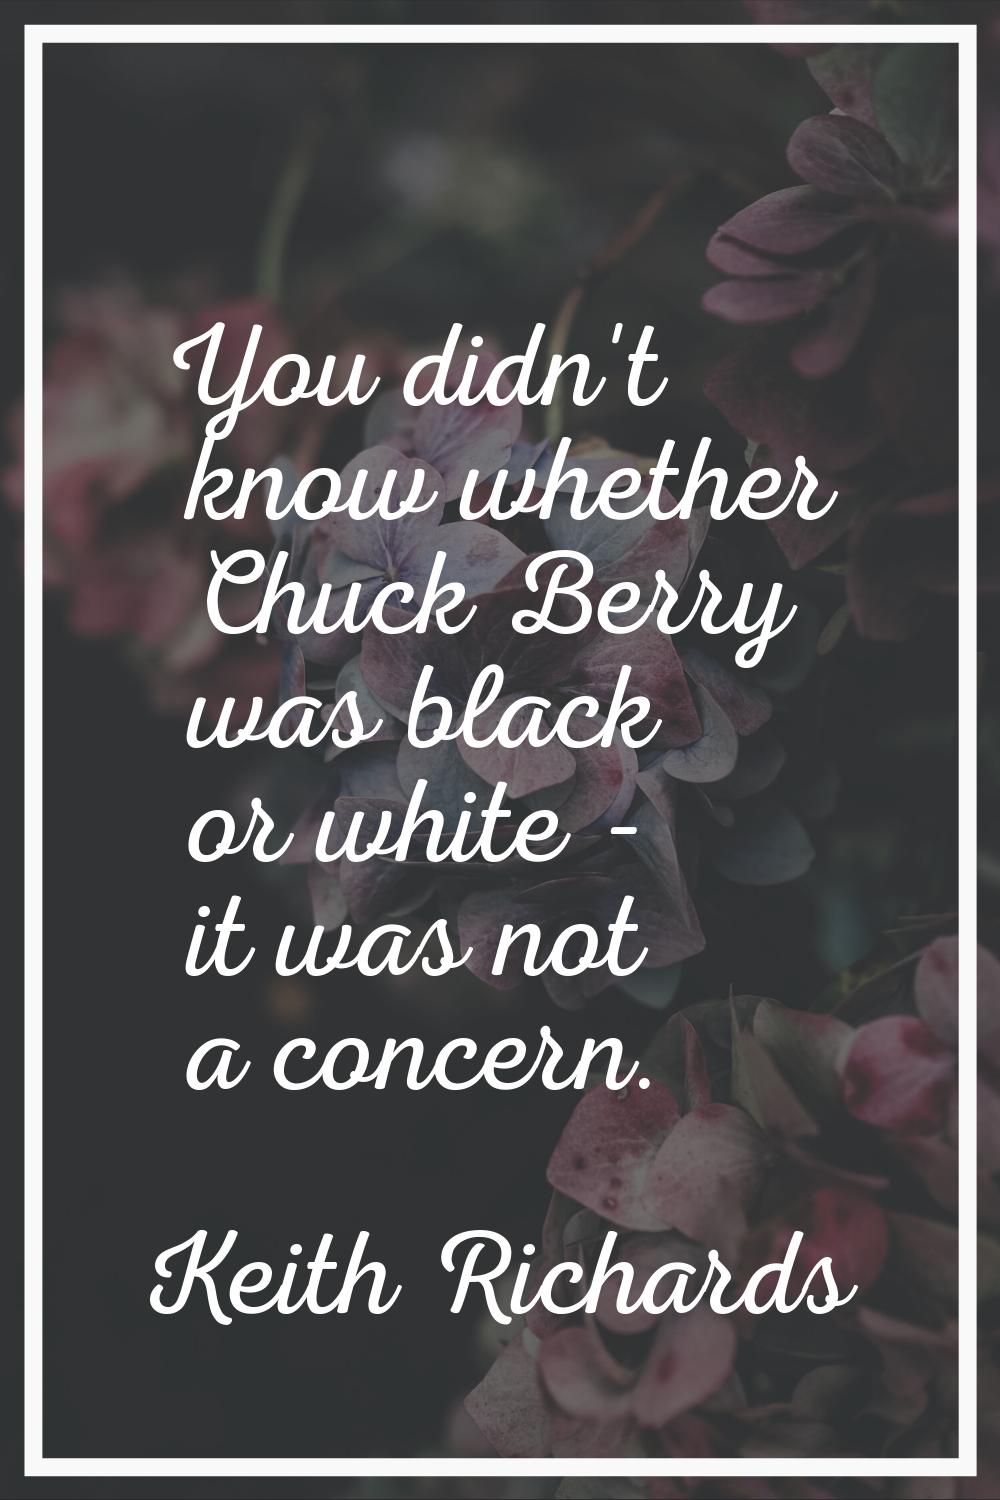 You didn't know whether Chuck Berry was black or white - it was not a concern.